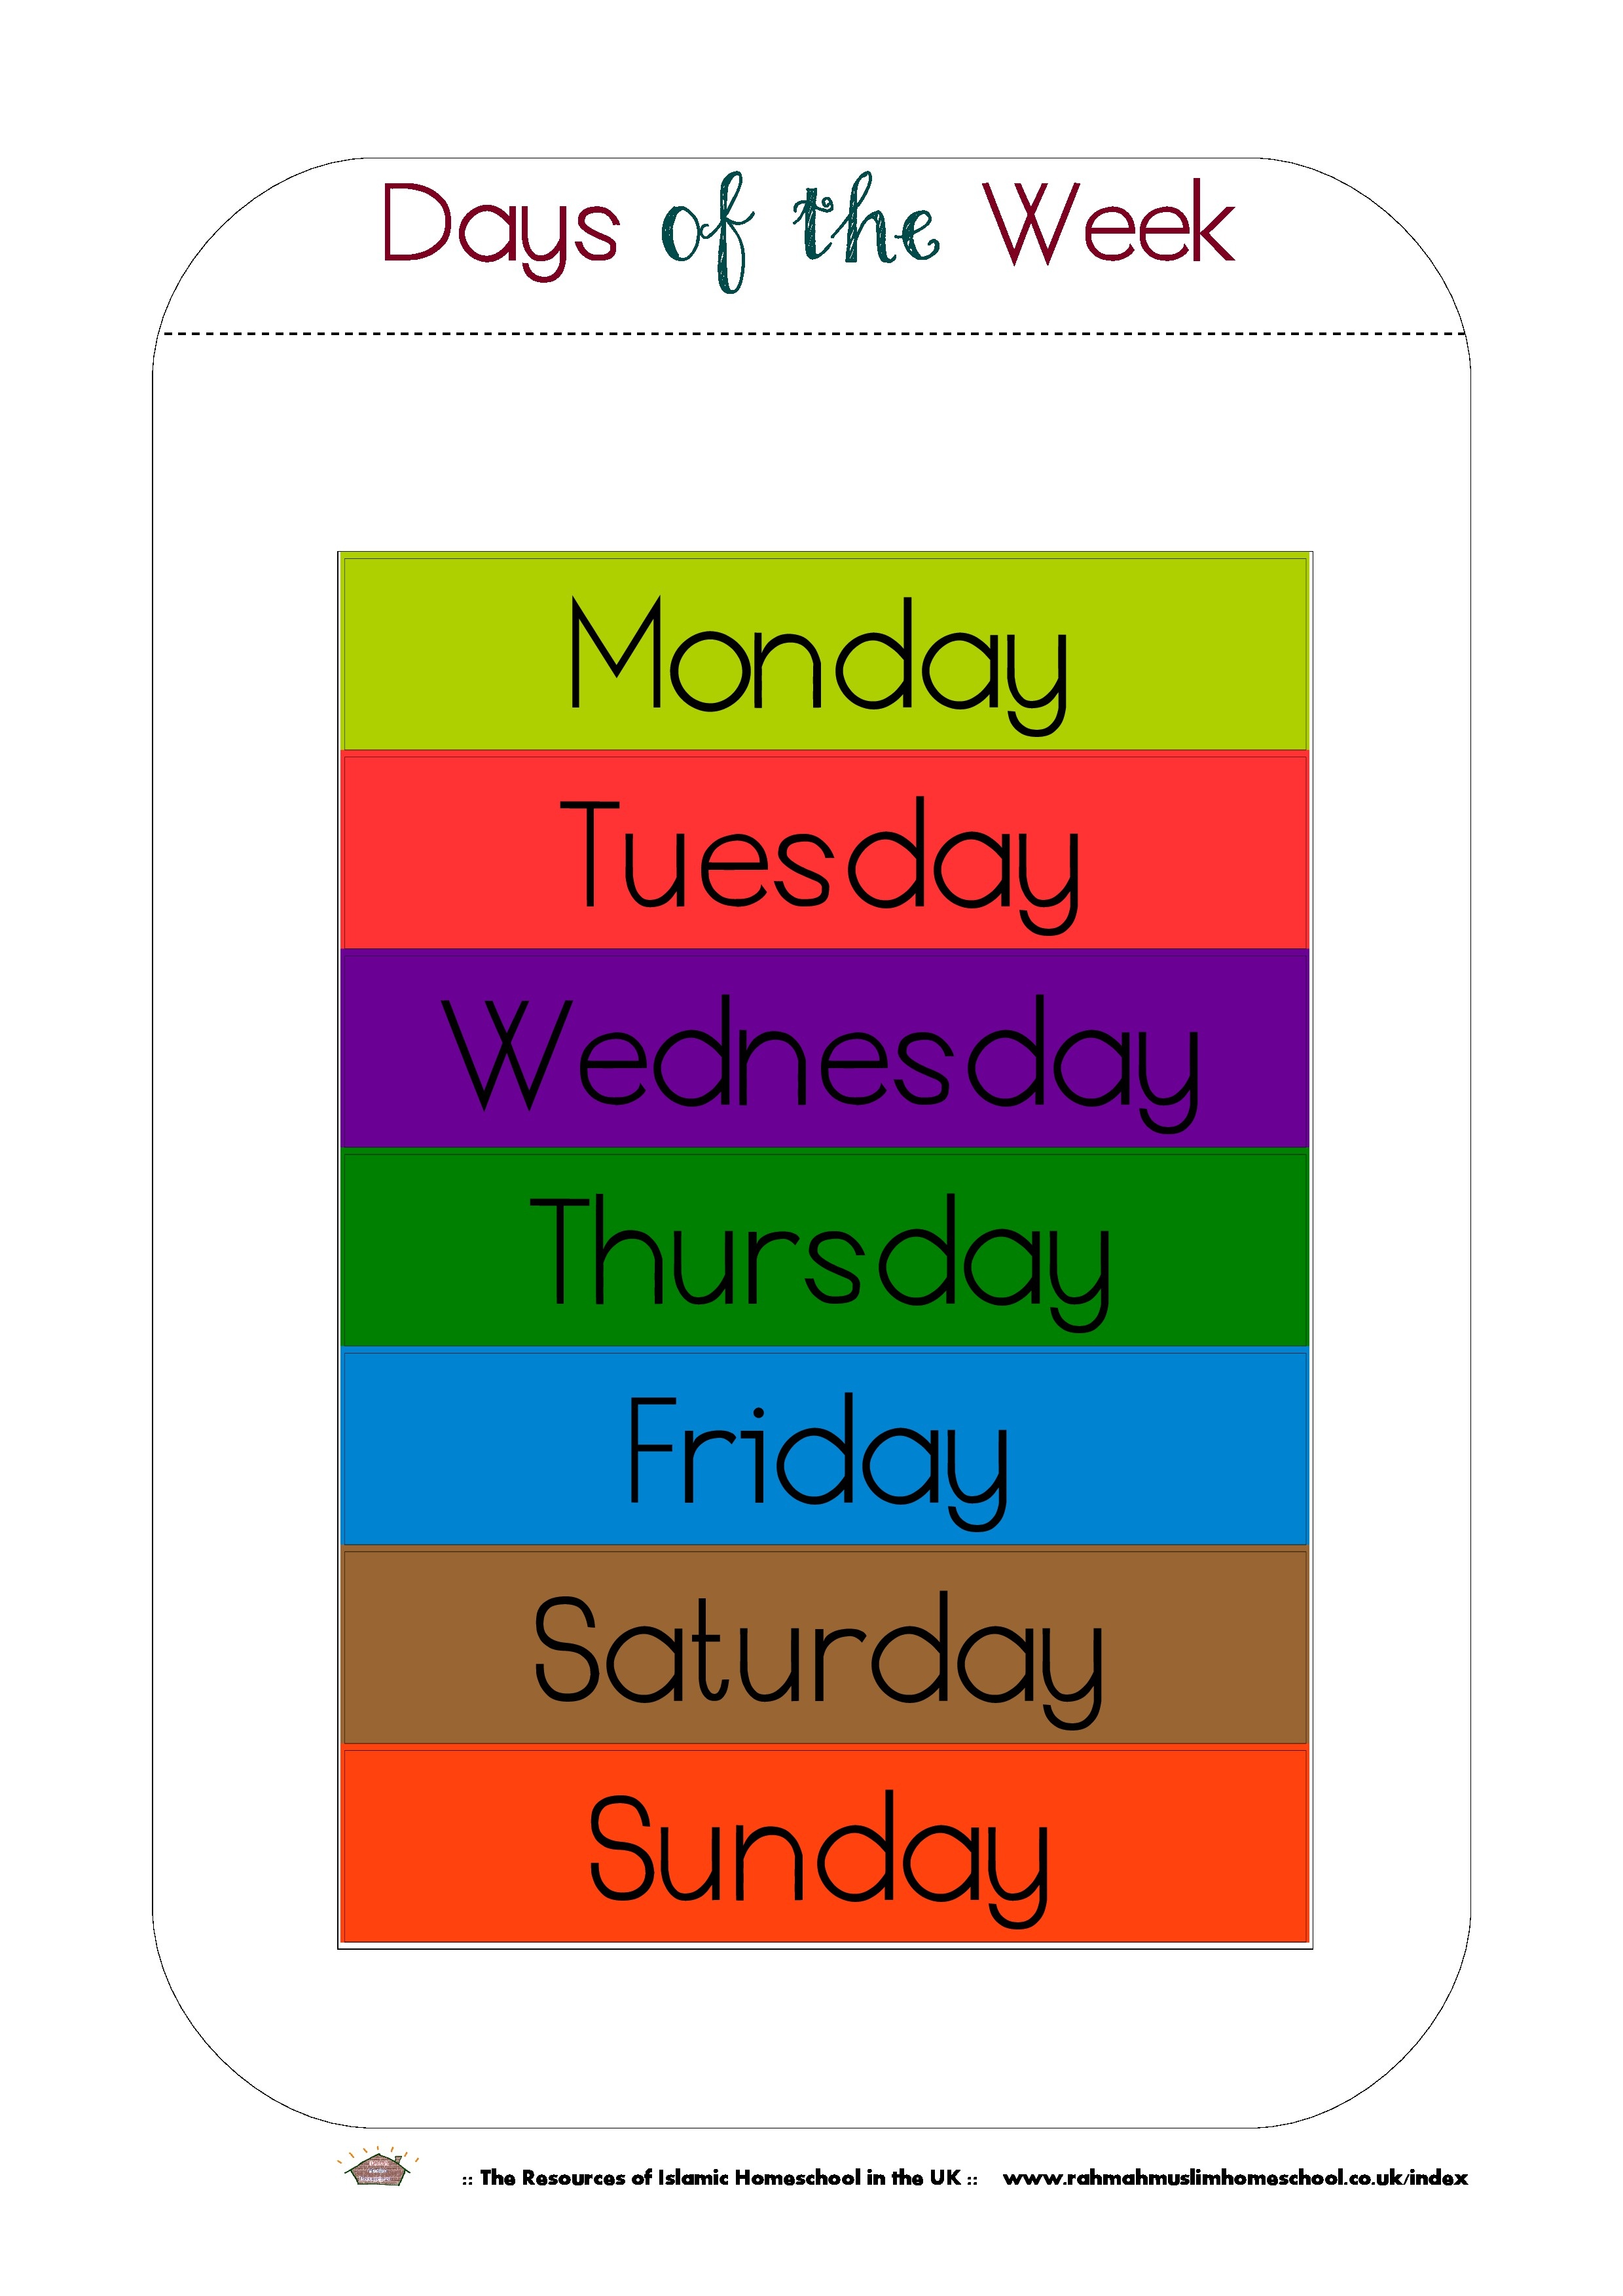 Free Printable Days Of The Week Workbook And Poster | The Resources - Free Printable Days Of The Week Cards